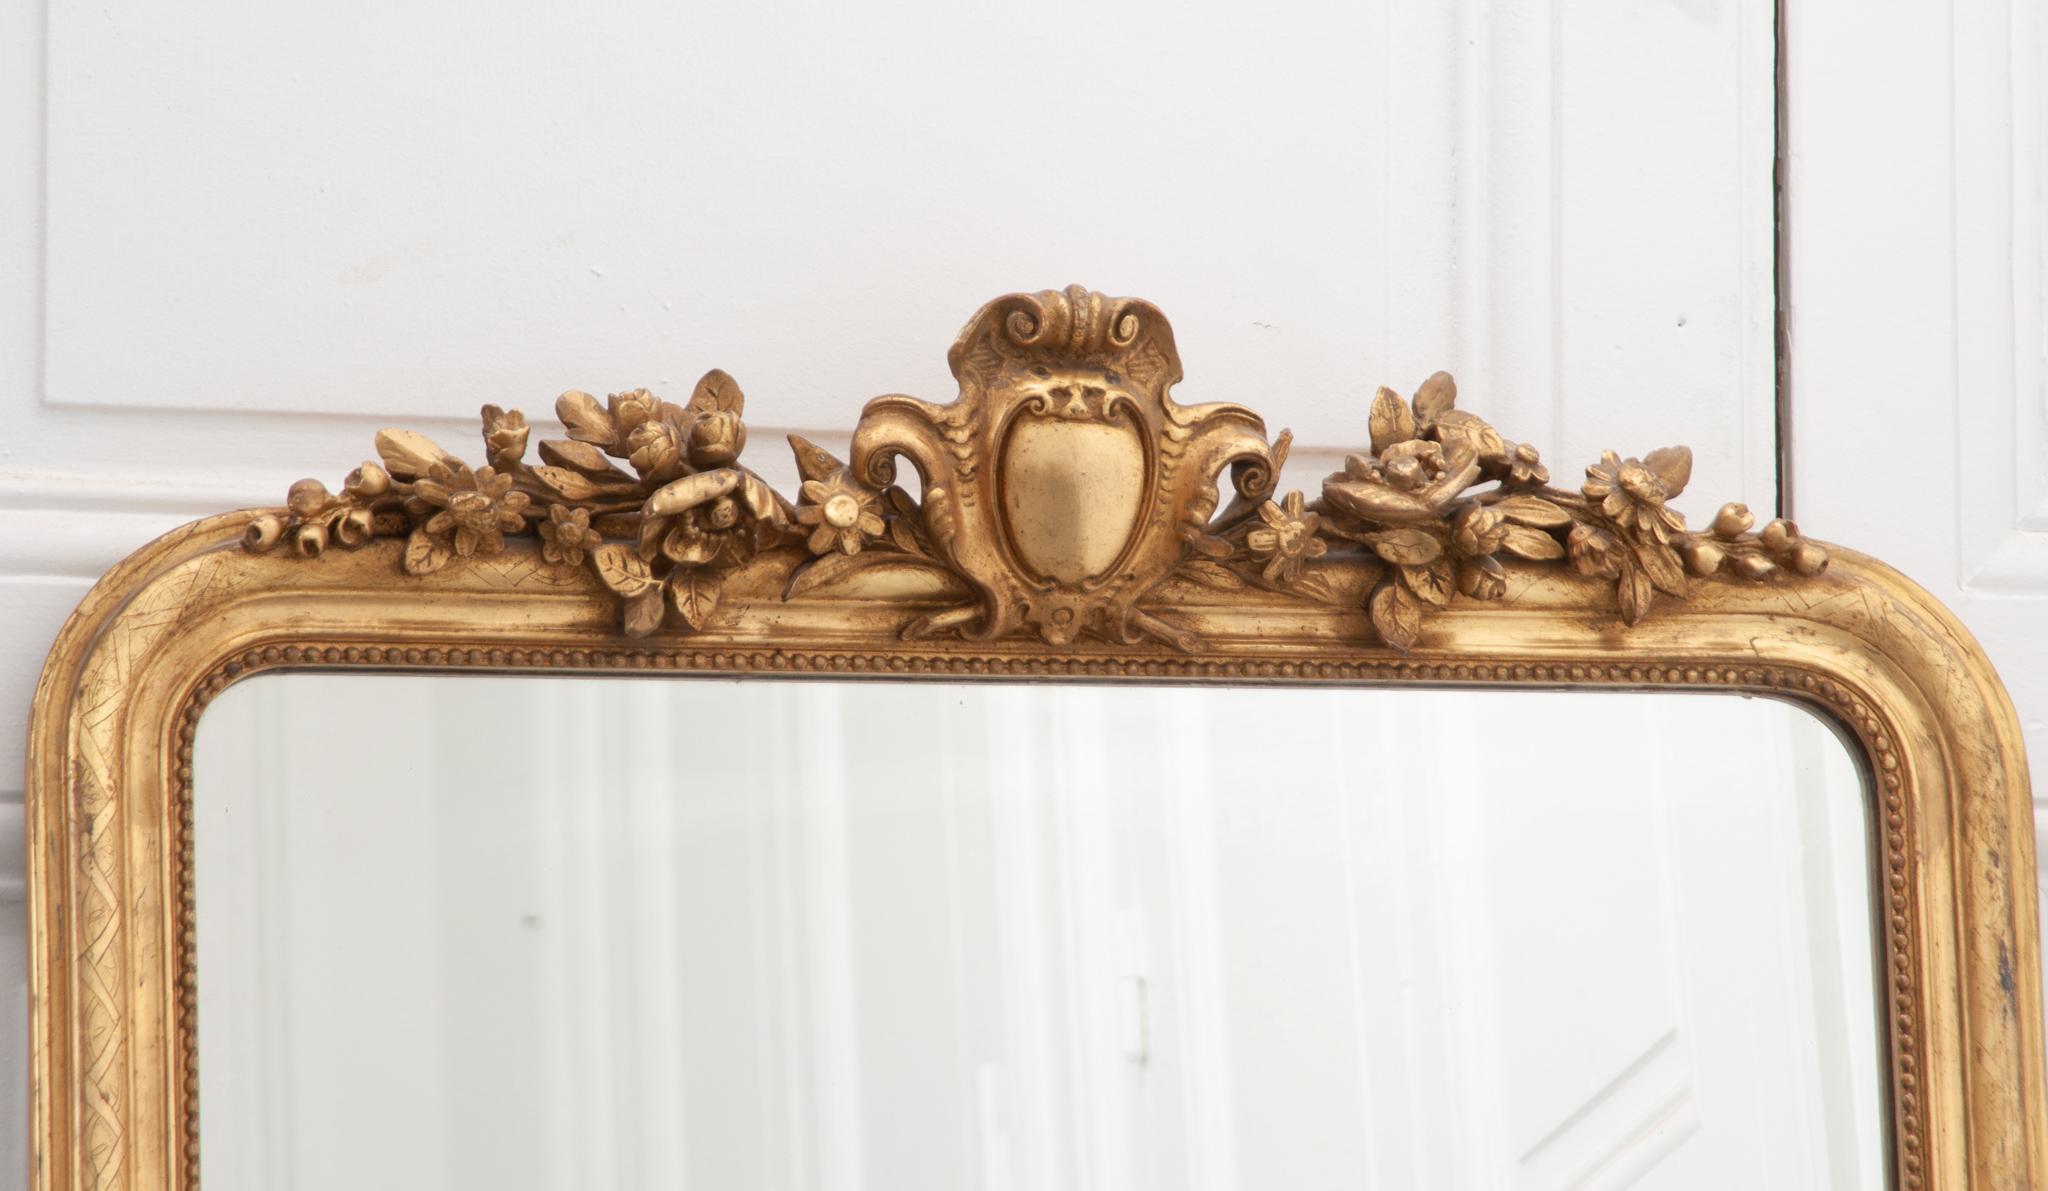 The perfect petite Louis Philippe style mirror for your mantel or small space! The giltwood frame has a continuous zig zag pattern on the outer frame and bead pattern closer to the mirror plate. A large crest of highly carved flowers and shield